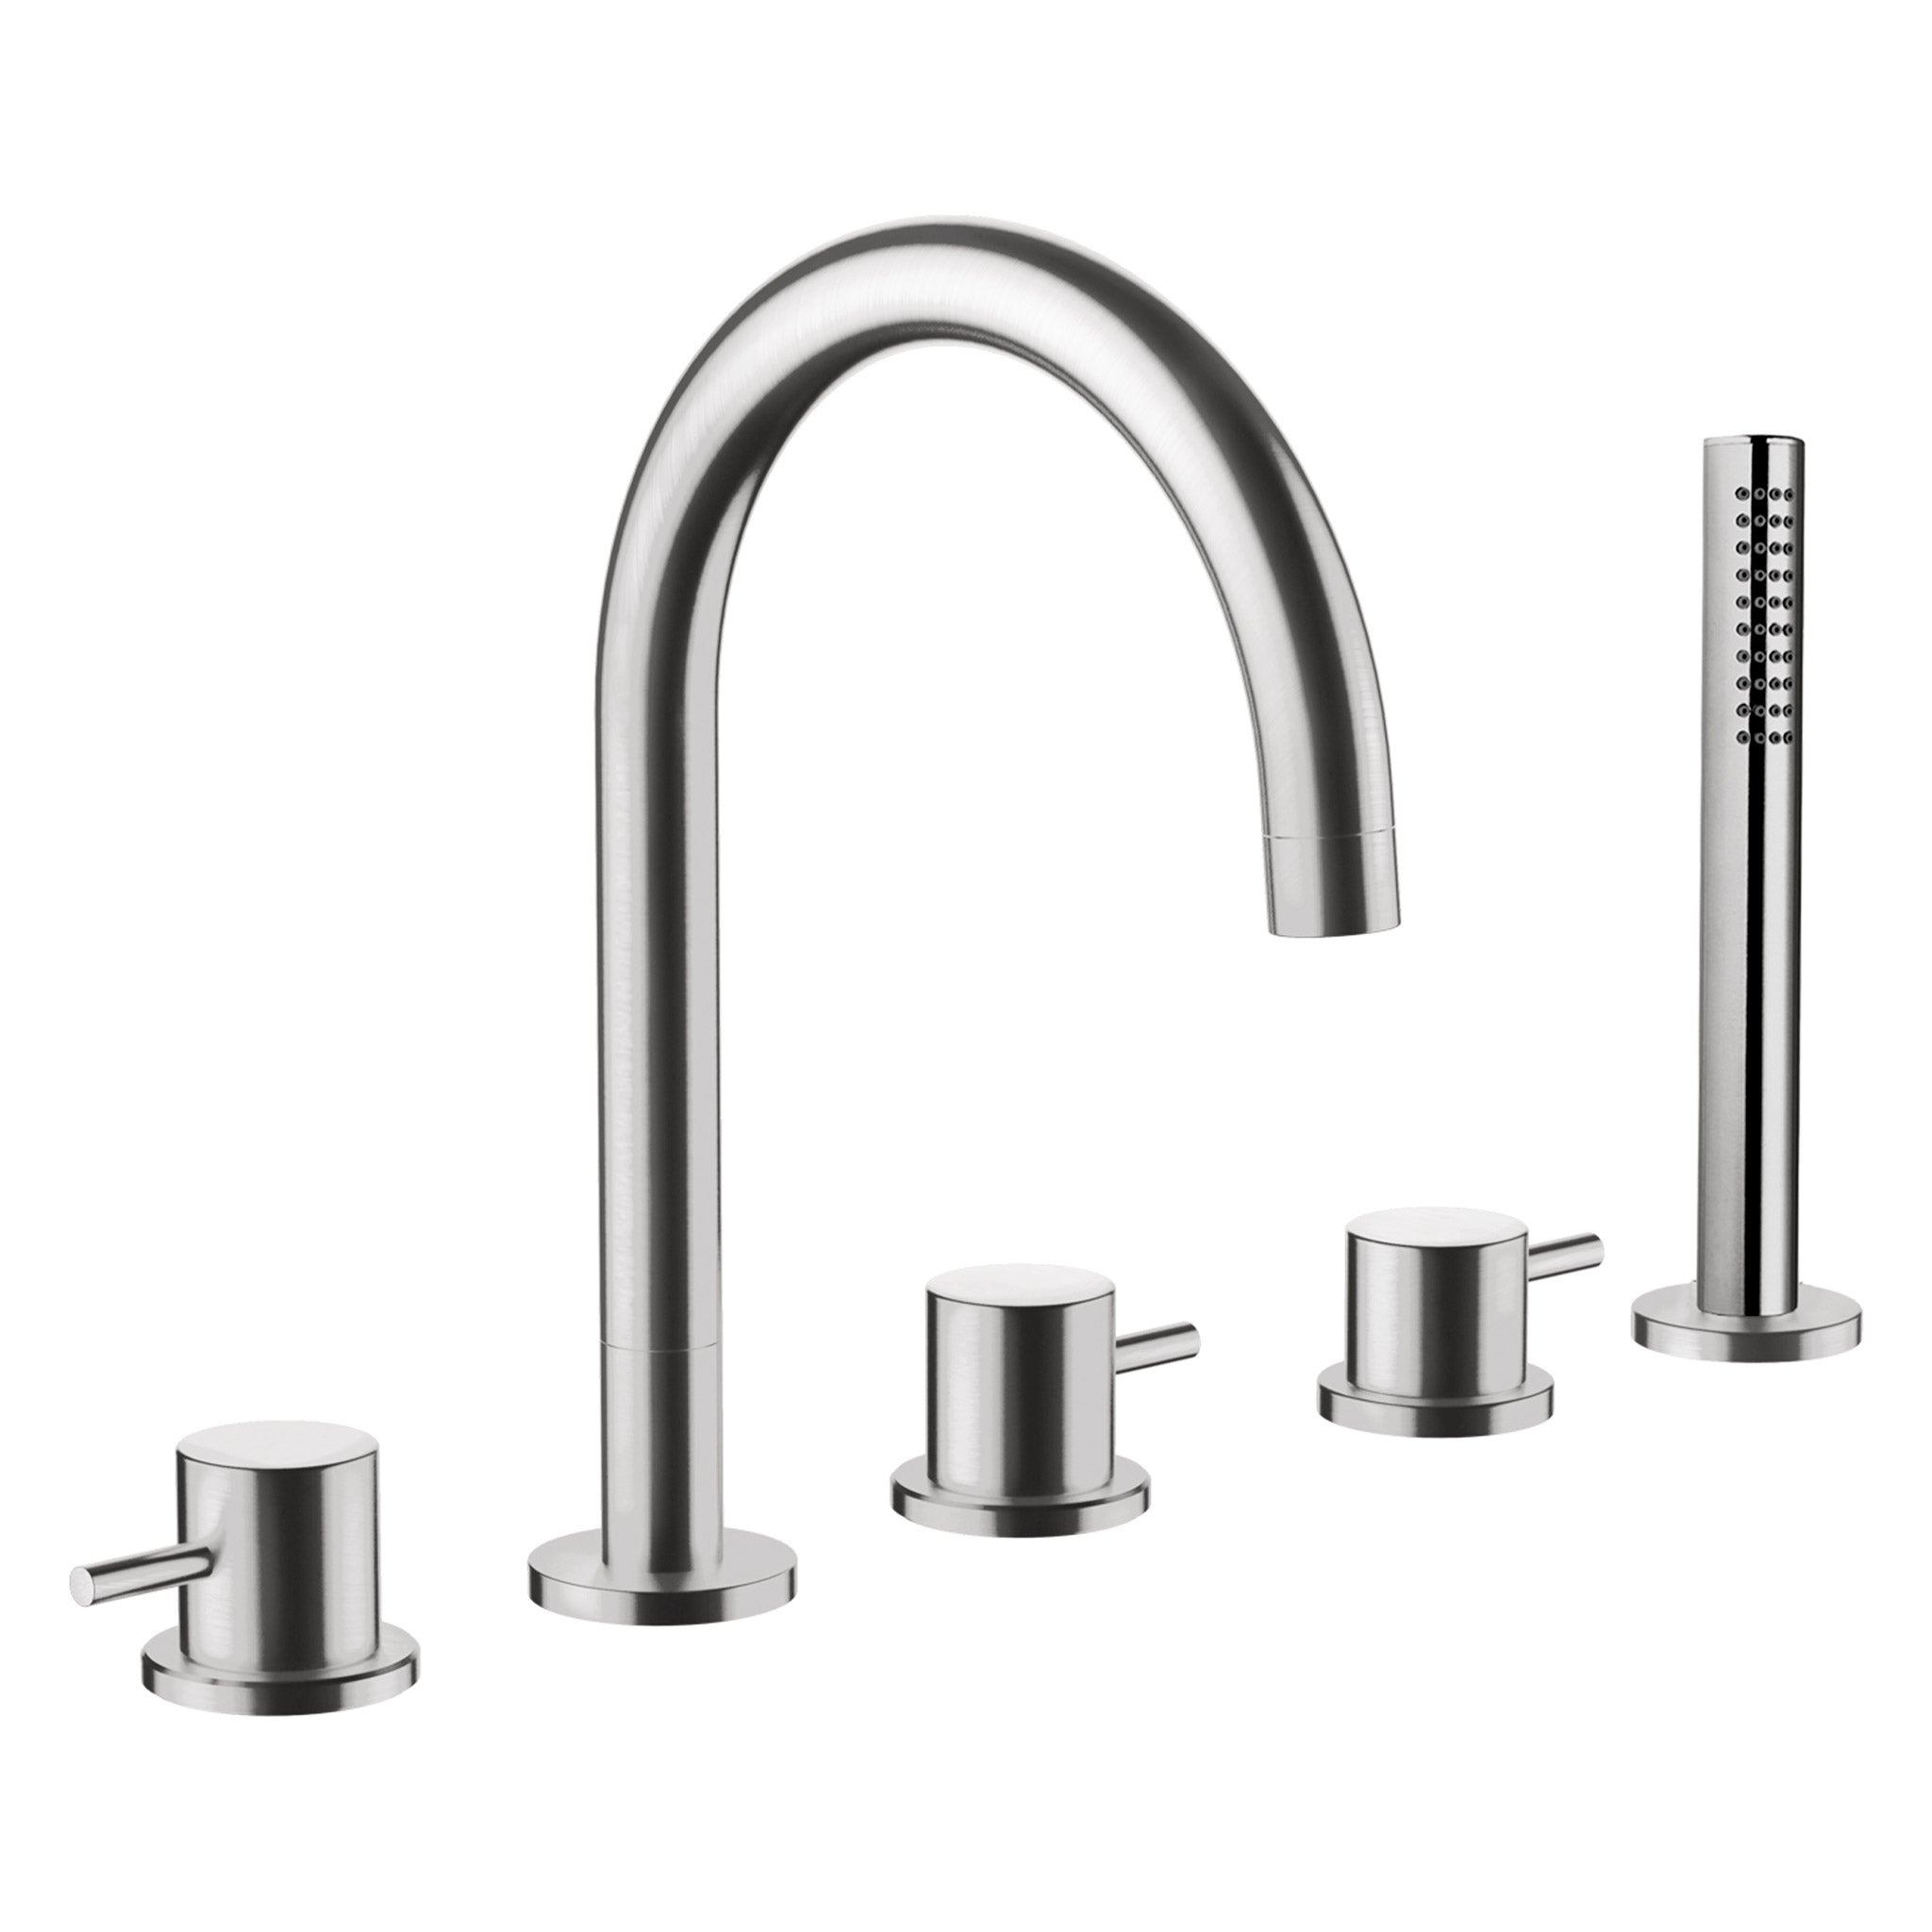 JTP Inox 5 Hole Bath Shower Mixer Tap With Extractable Hand Shower Swivel Spout & Diverter